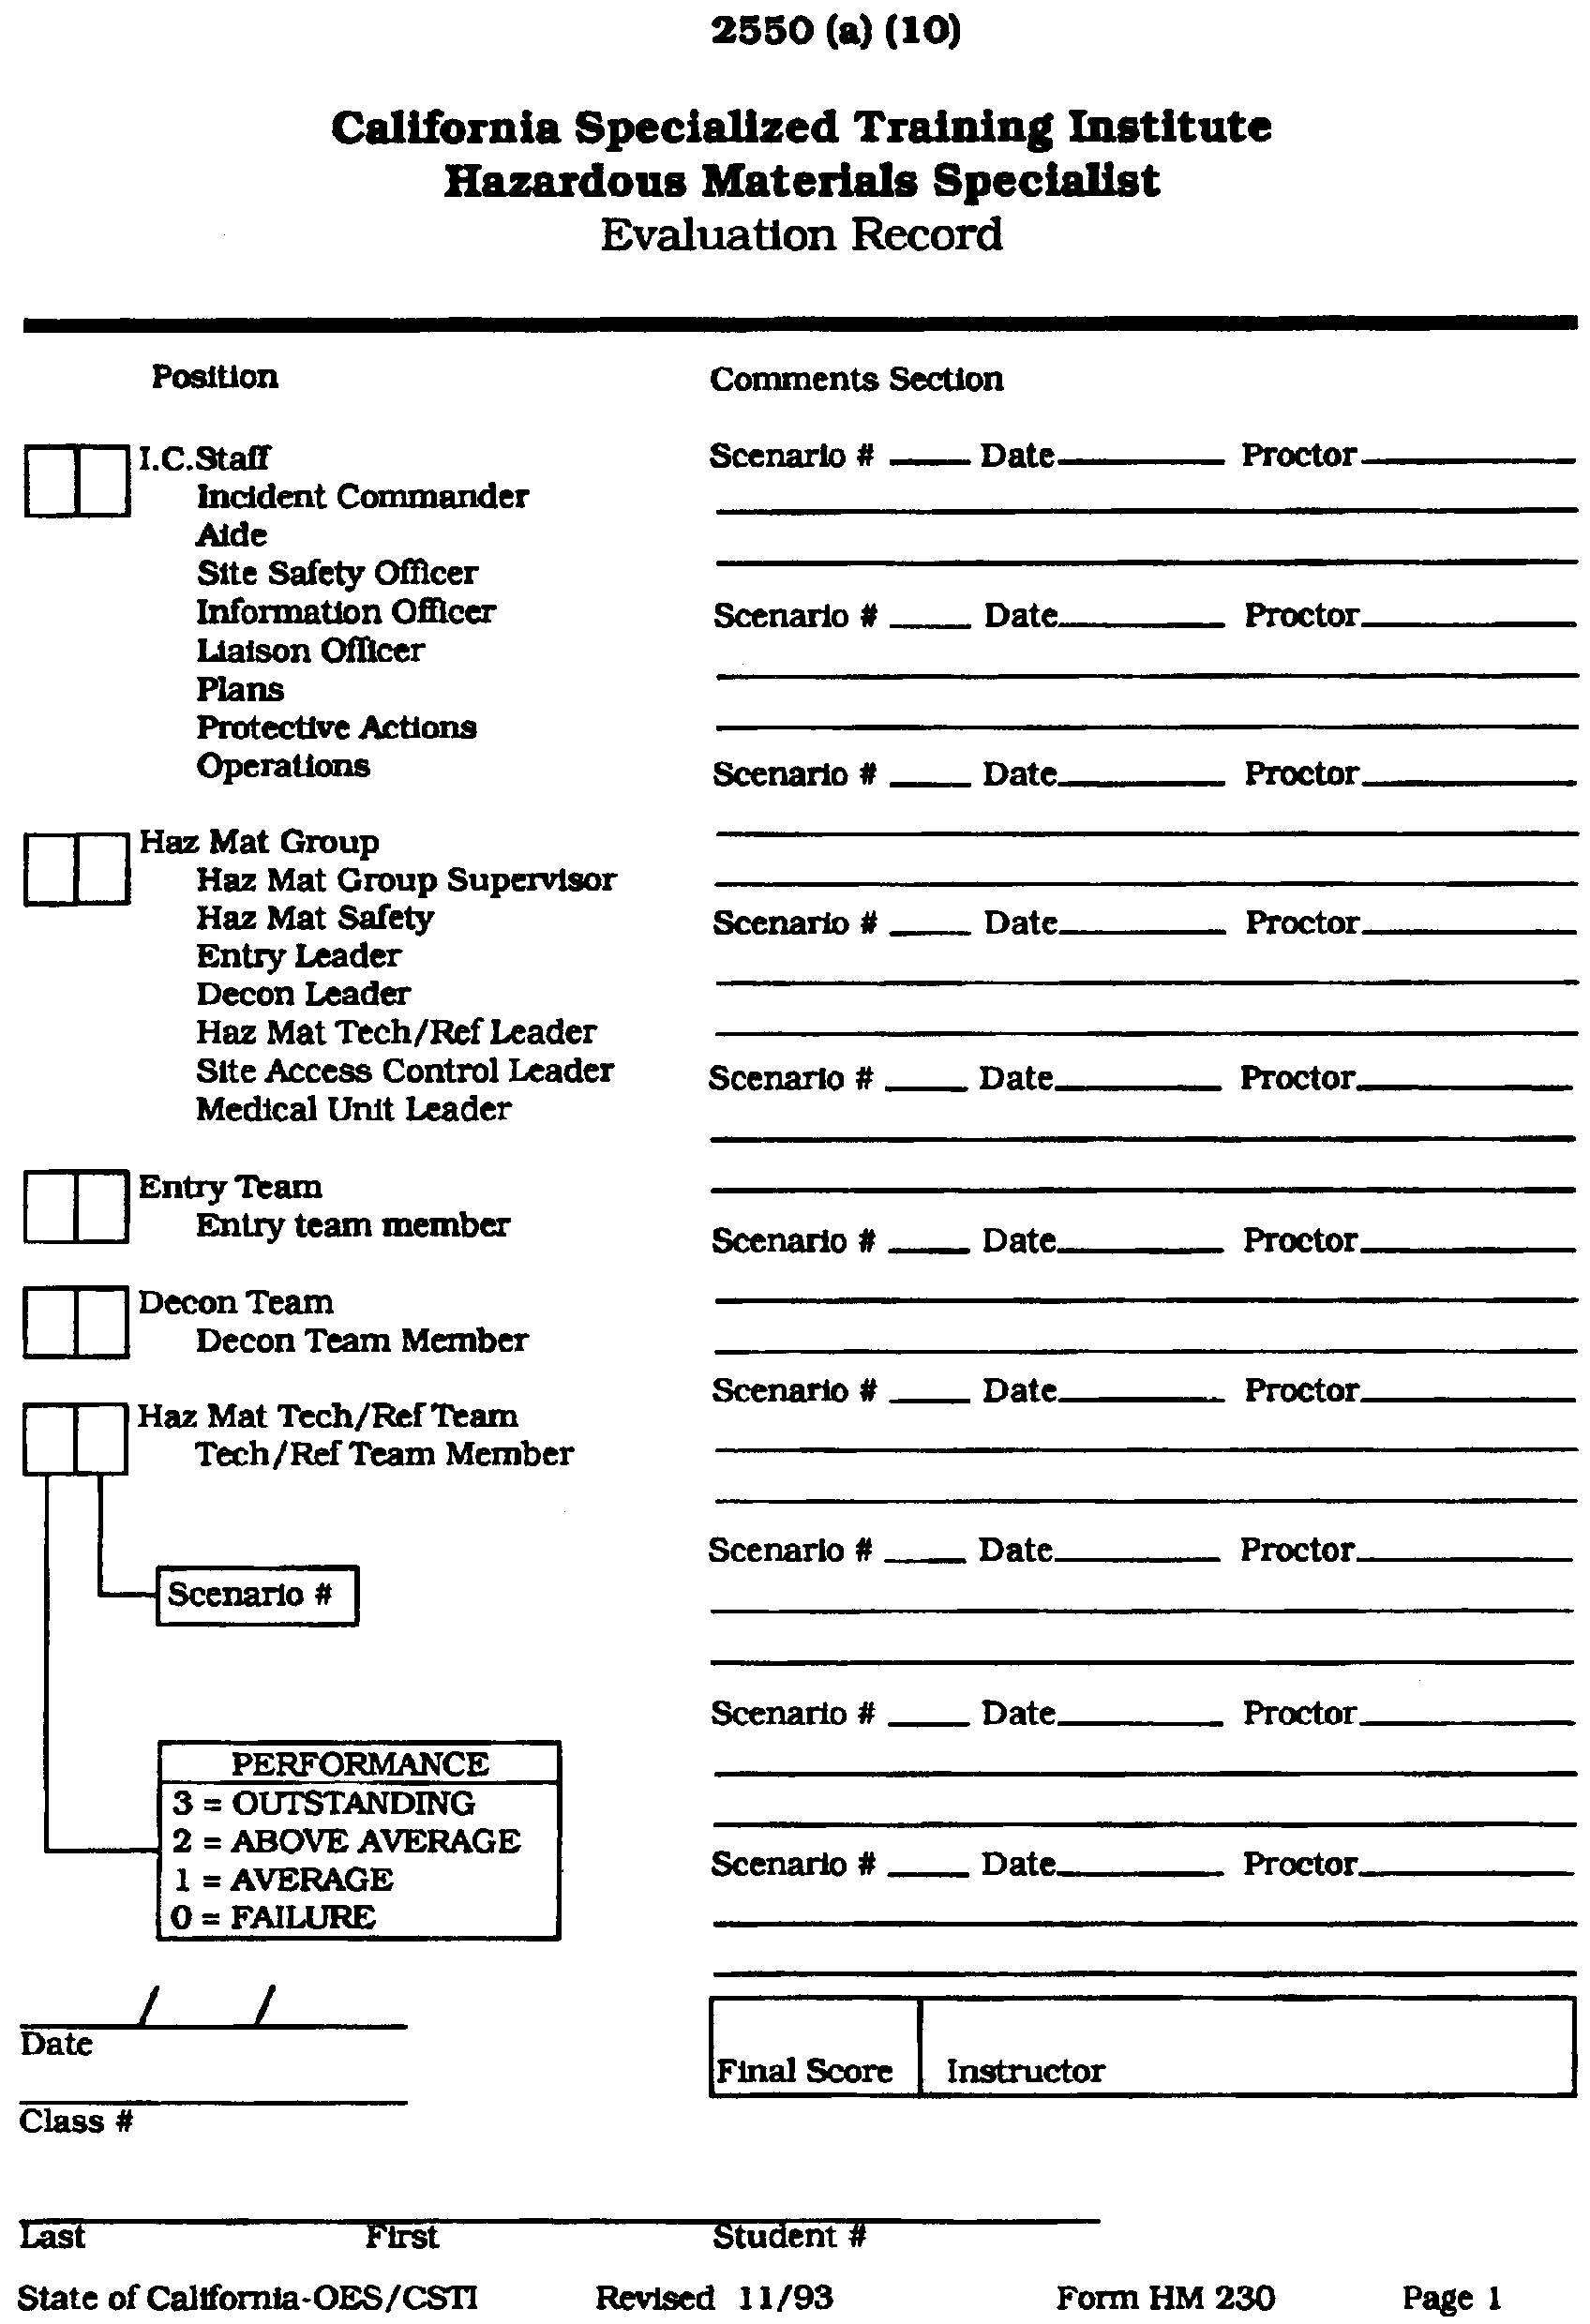 Image 22 within § 2550. Administrative Forms.